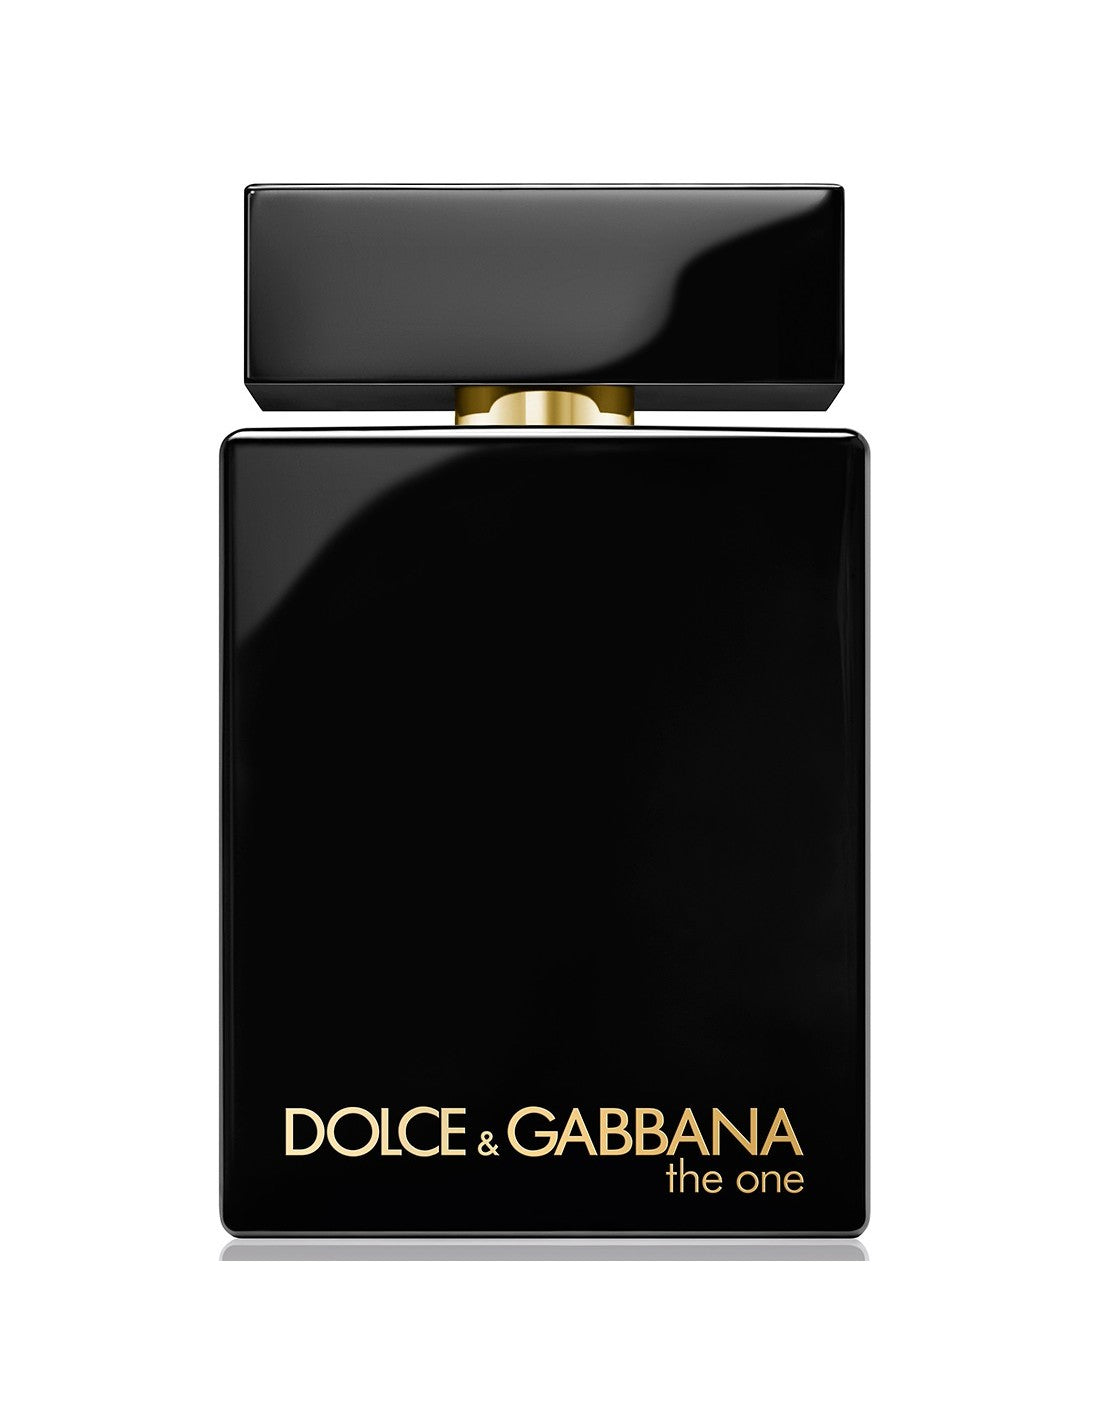 Dolce and Gabbana The One For Men Edp Intense Spray 100ml